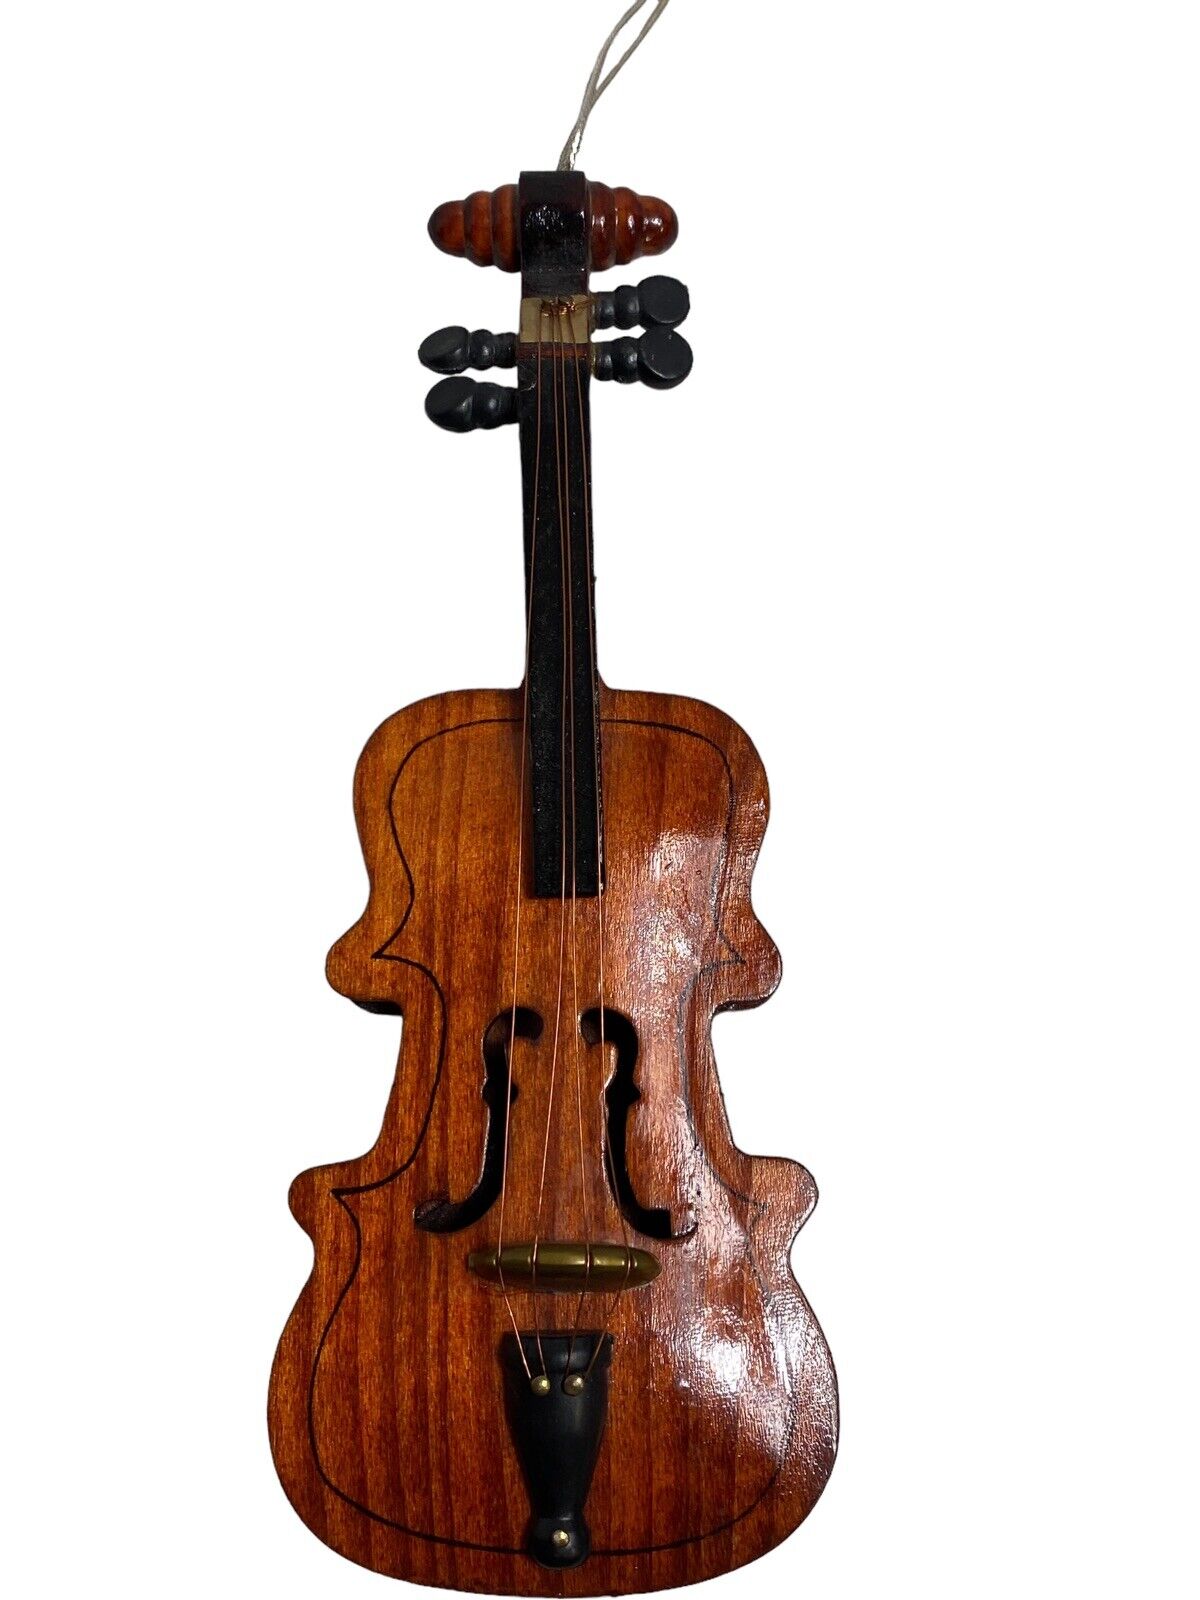 Realistic Wooden Violin Strung Copper Wire Ornament Instrument - 8” Inches Tall